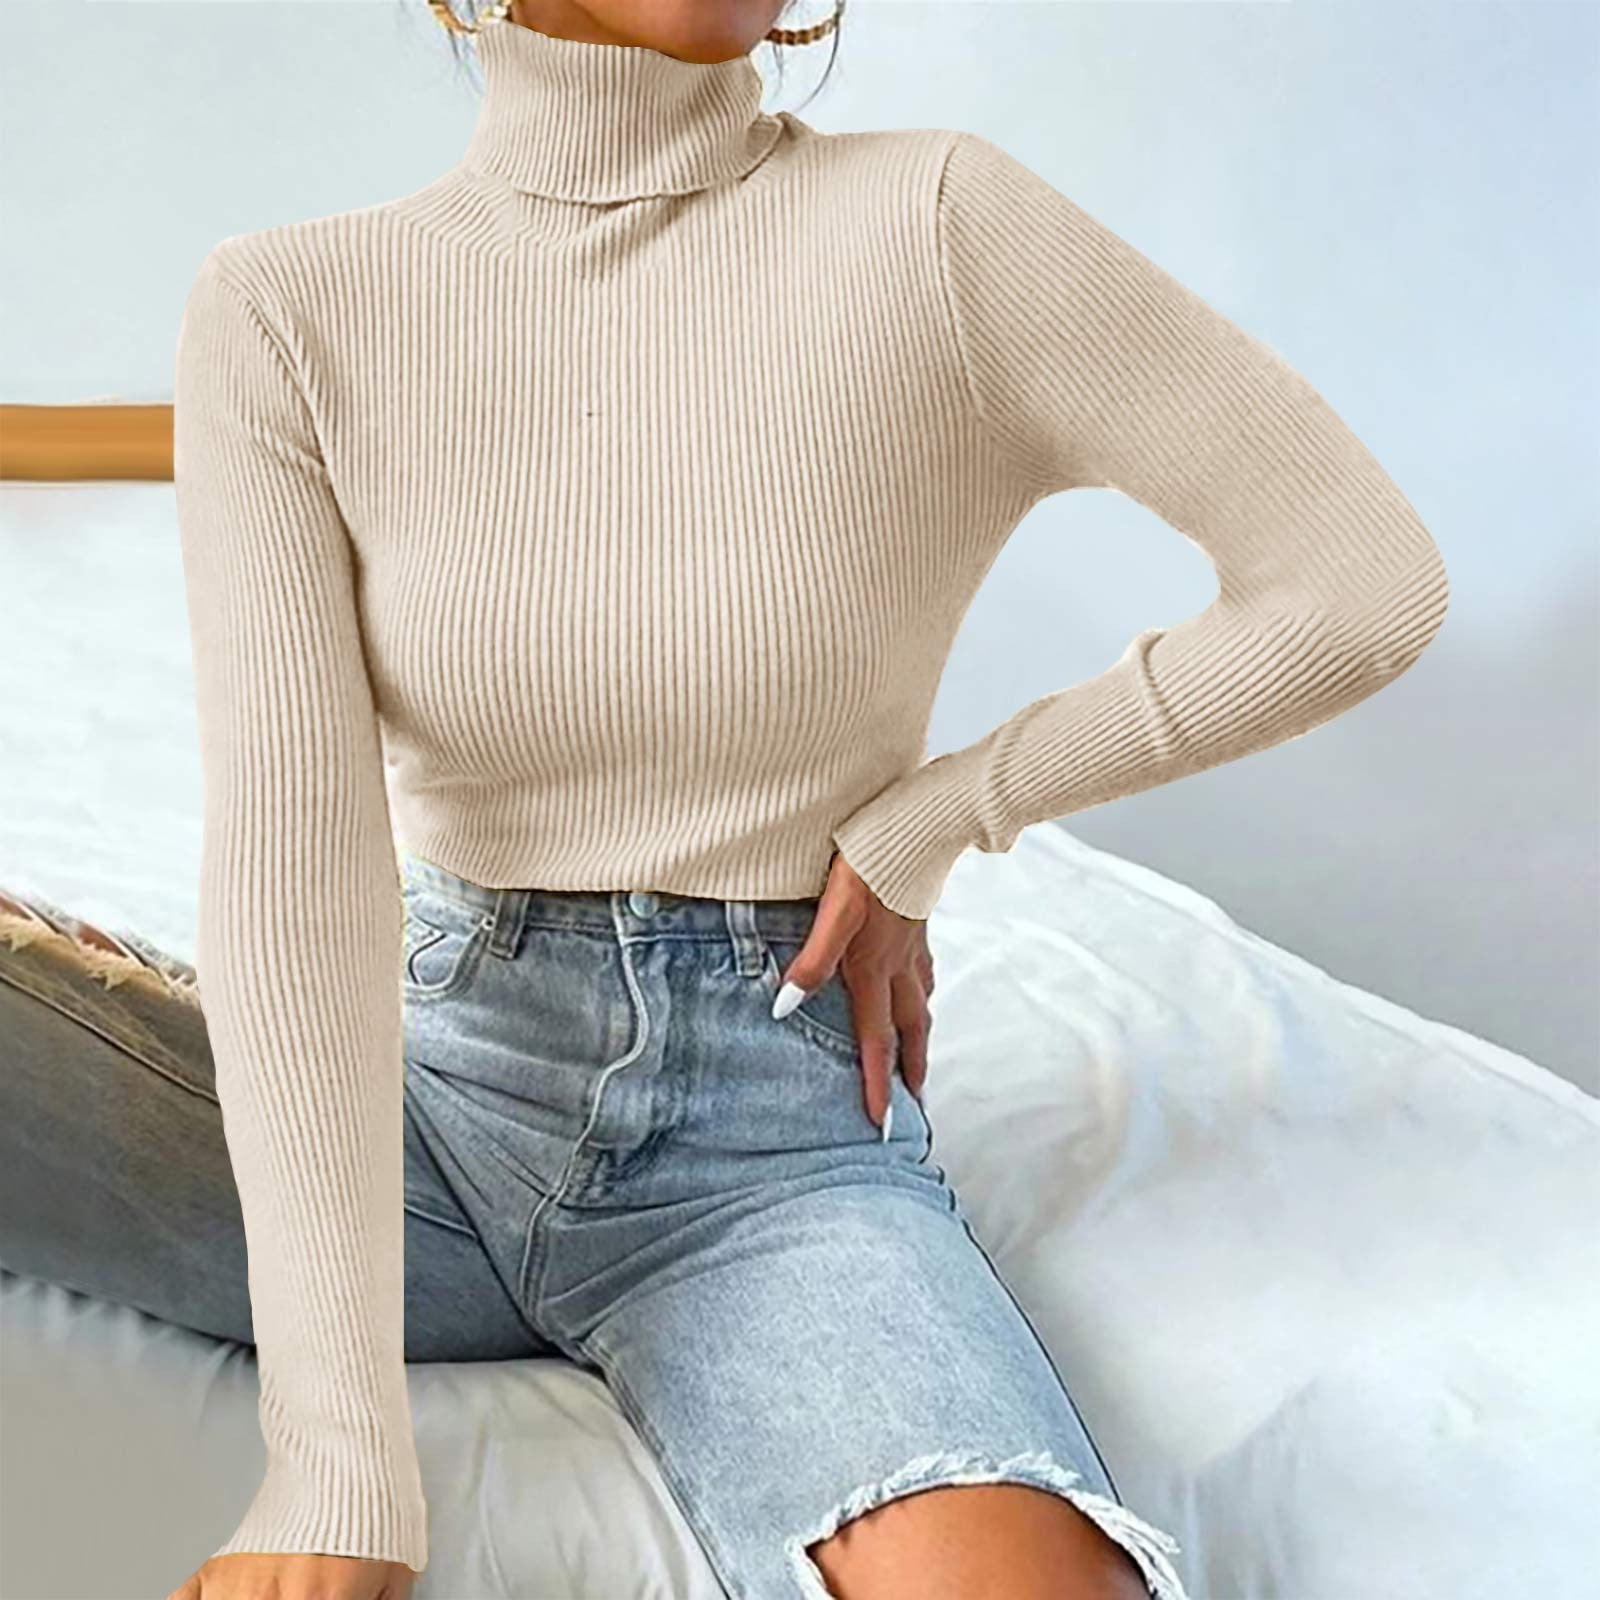 Bnwani Turtle Neck Sweater for Women Solid Color Top Knit Pullover Long ...